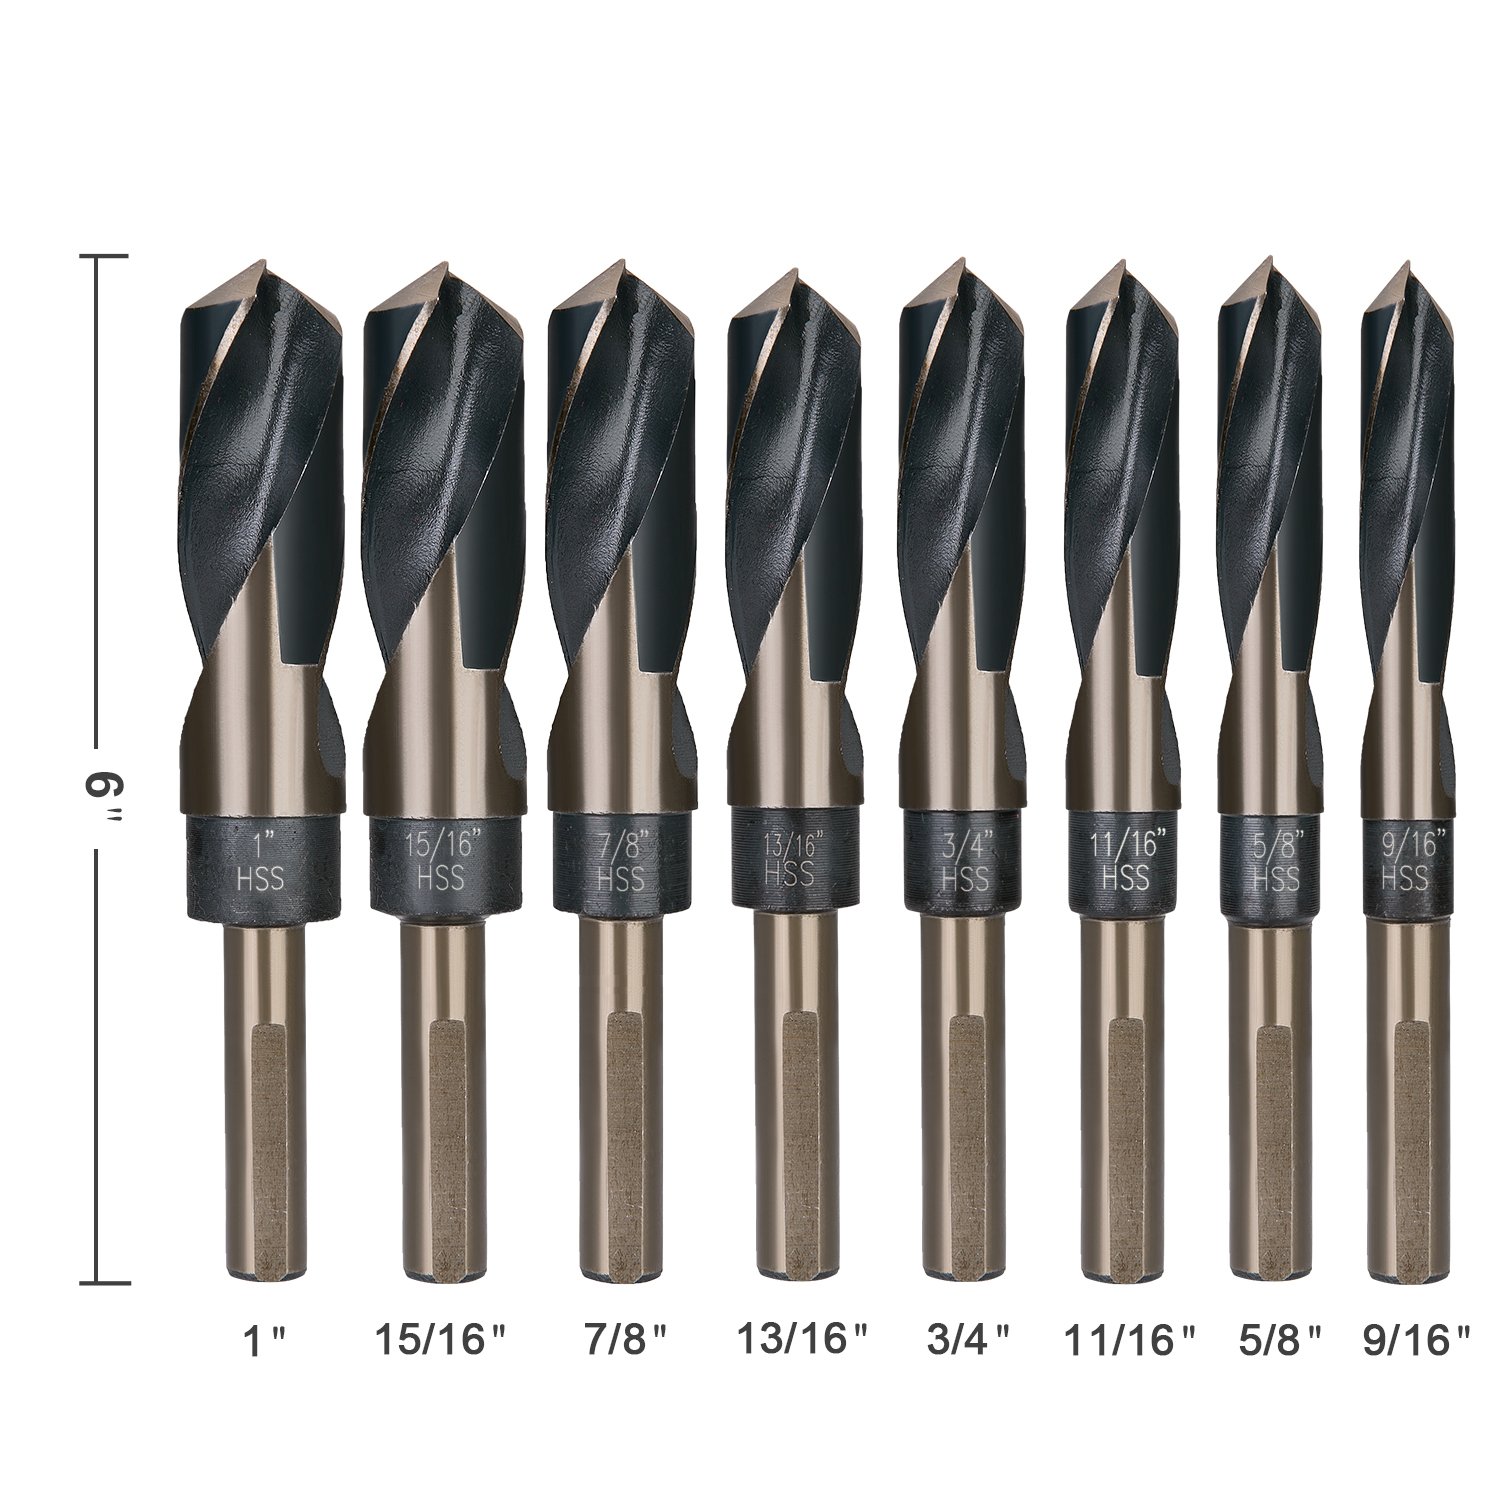 Reduced shank Rolled HSS twist drill bits with amber and black coating